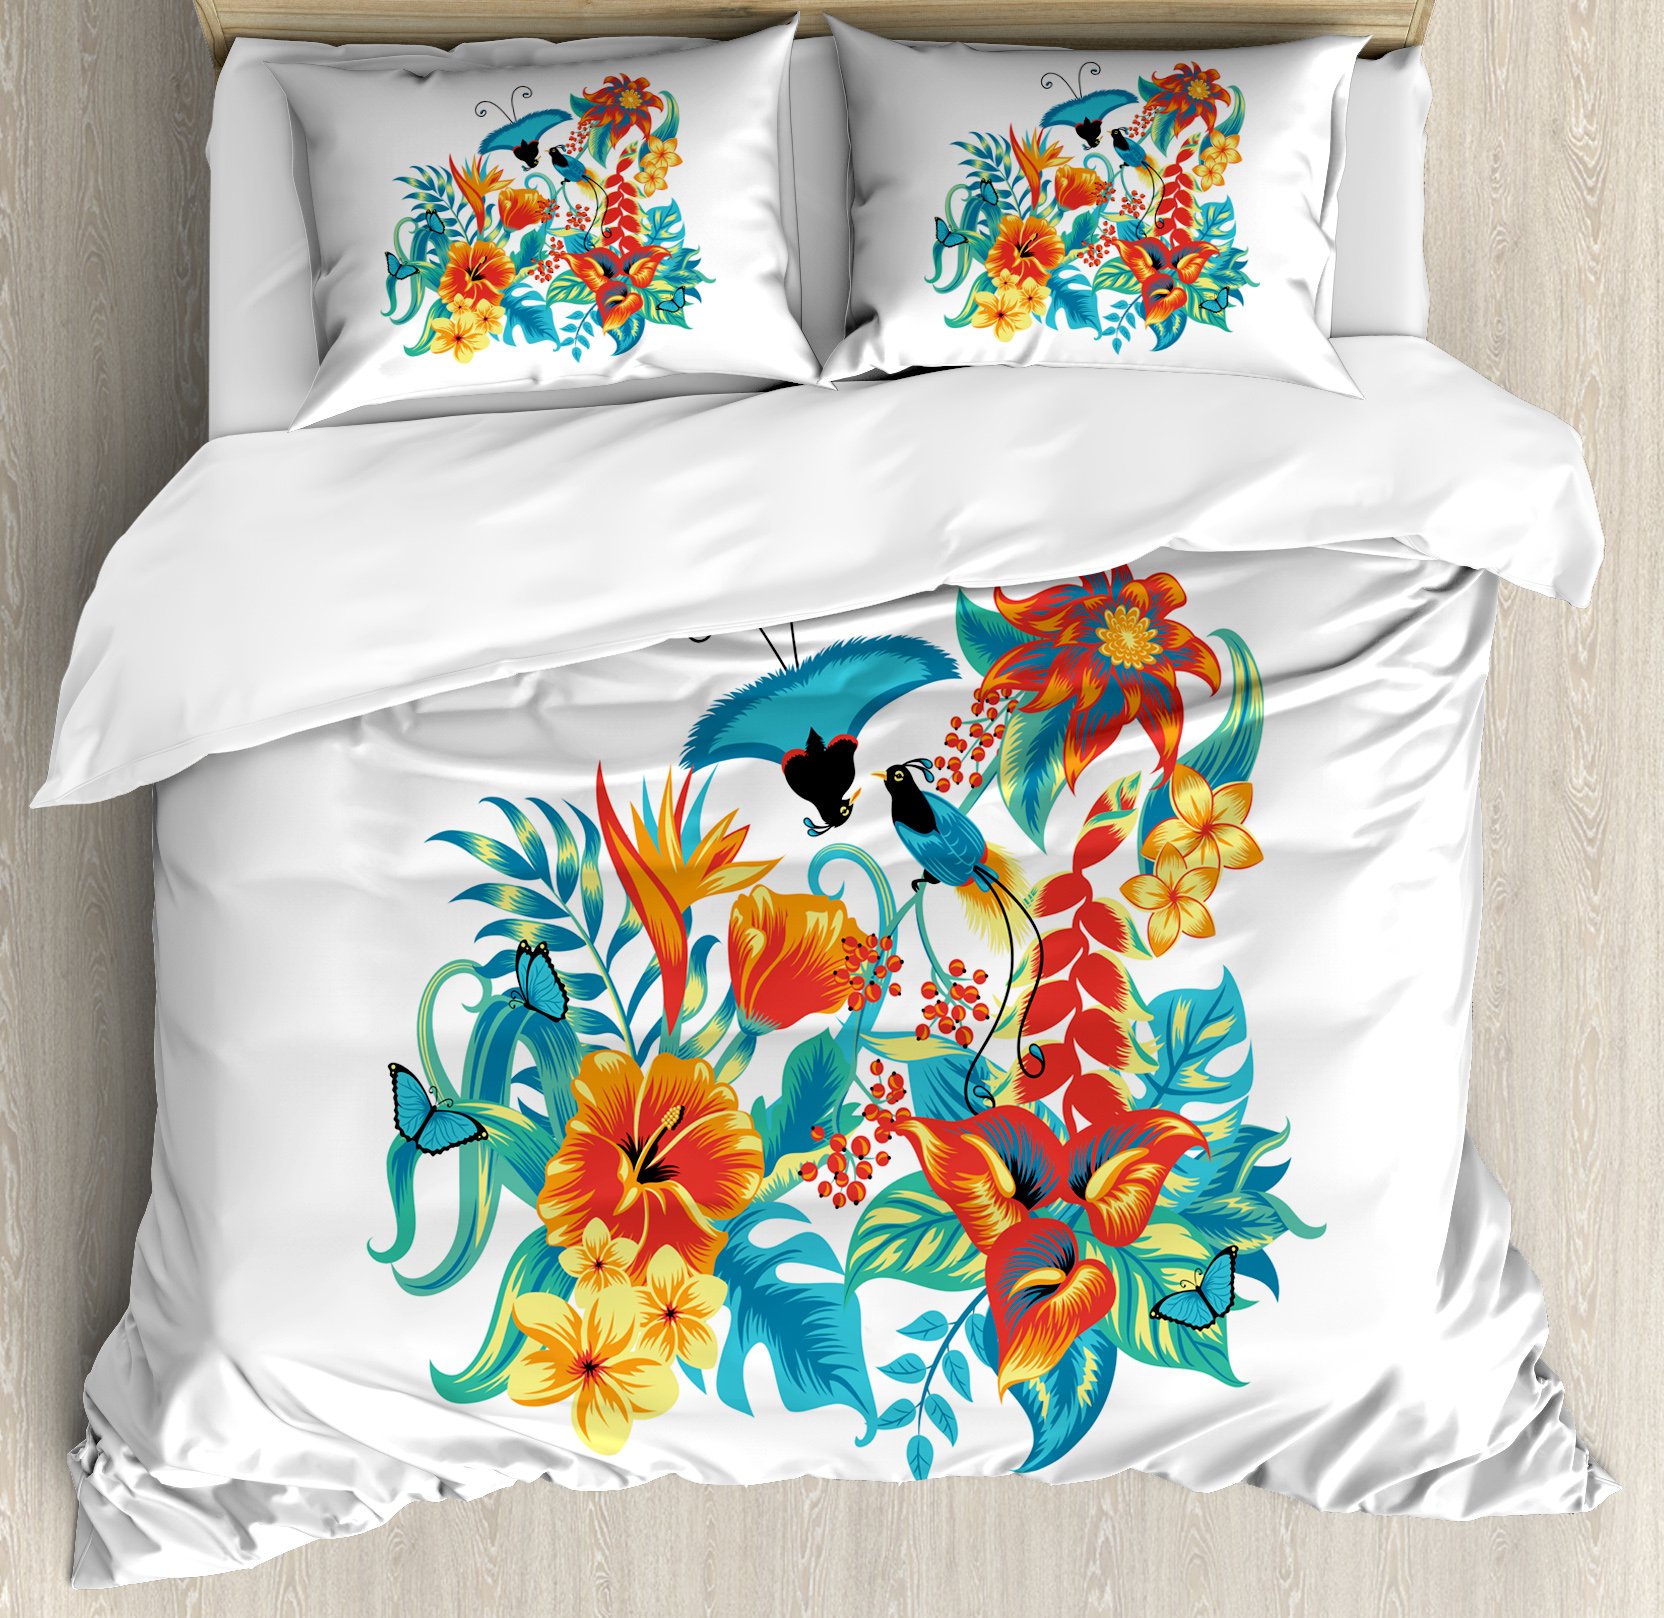 Ambesonne Flowers Duvet Cover Set, Tropical Exotic Jungle Foliage with Birds Hawaiian Island Flowers Retro, Decorative 3 Piece Bedding Set with 2 P...